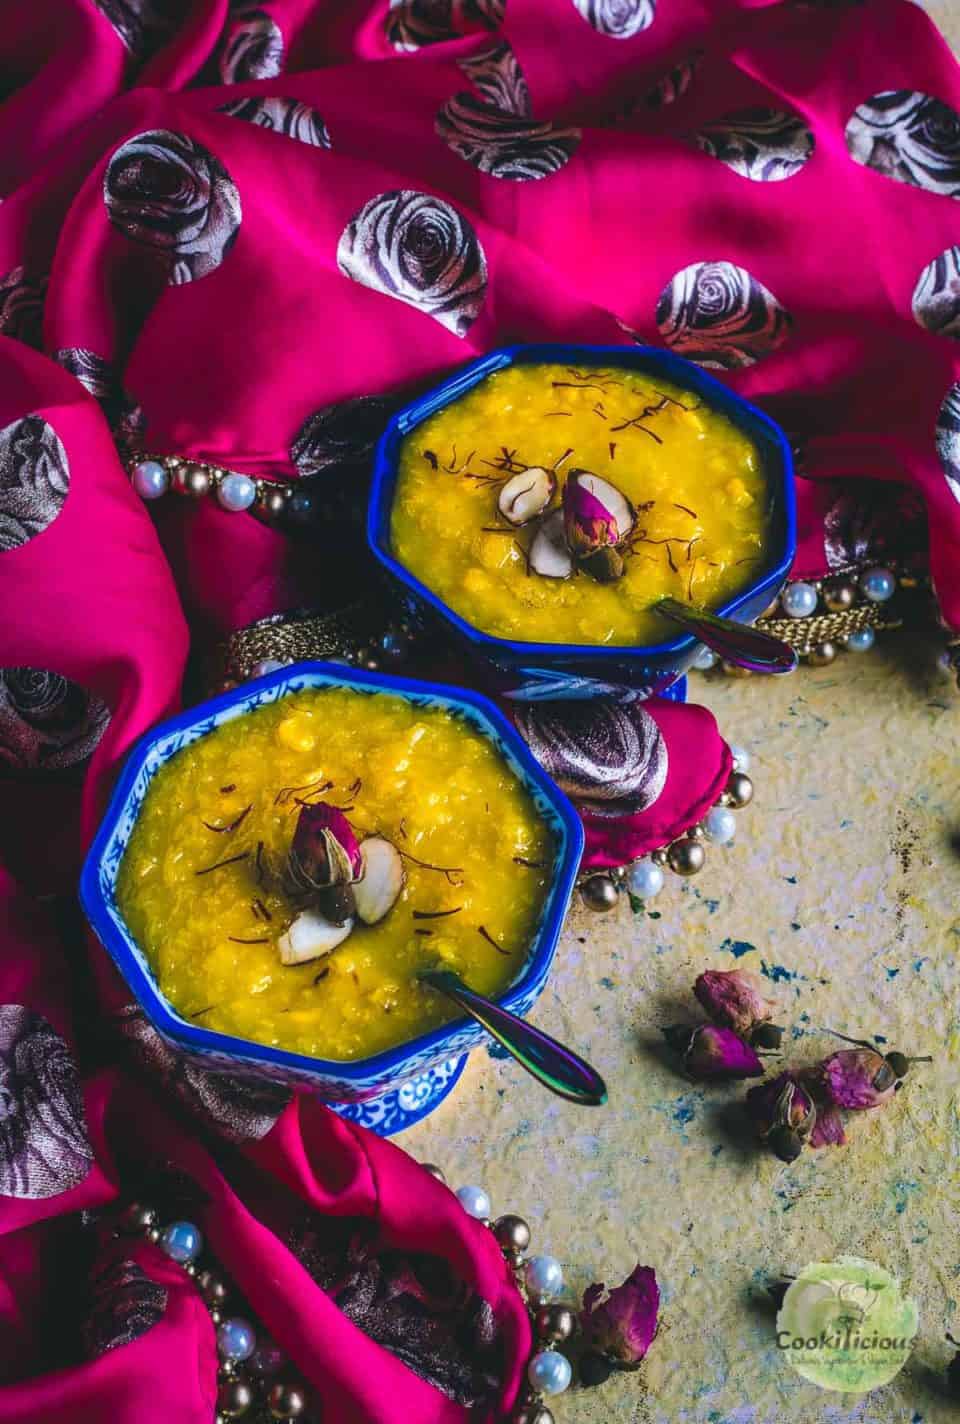 Jhajhariya (vegan corn and coconut milk pudding) served in 2 bowls with spoons in it